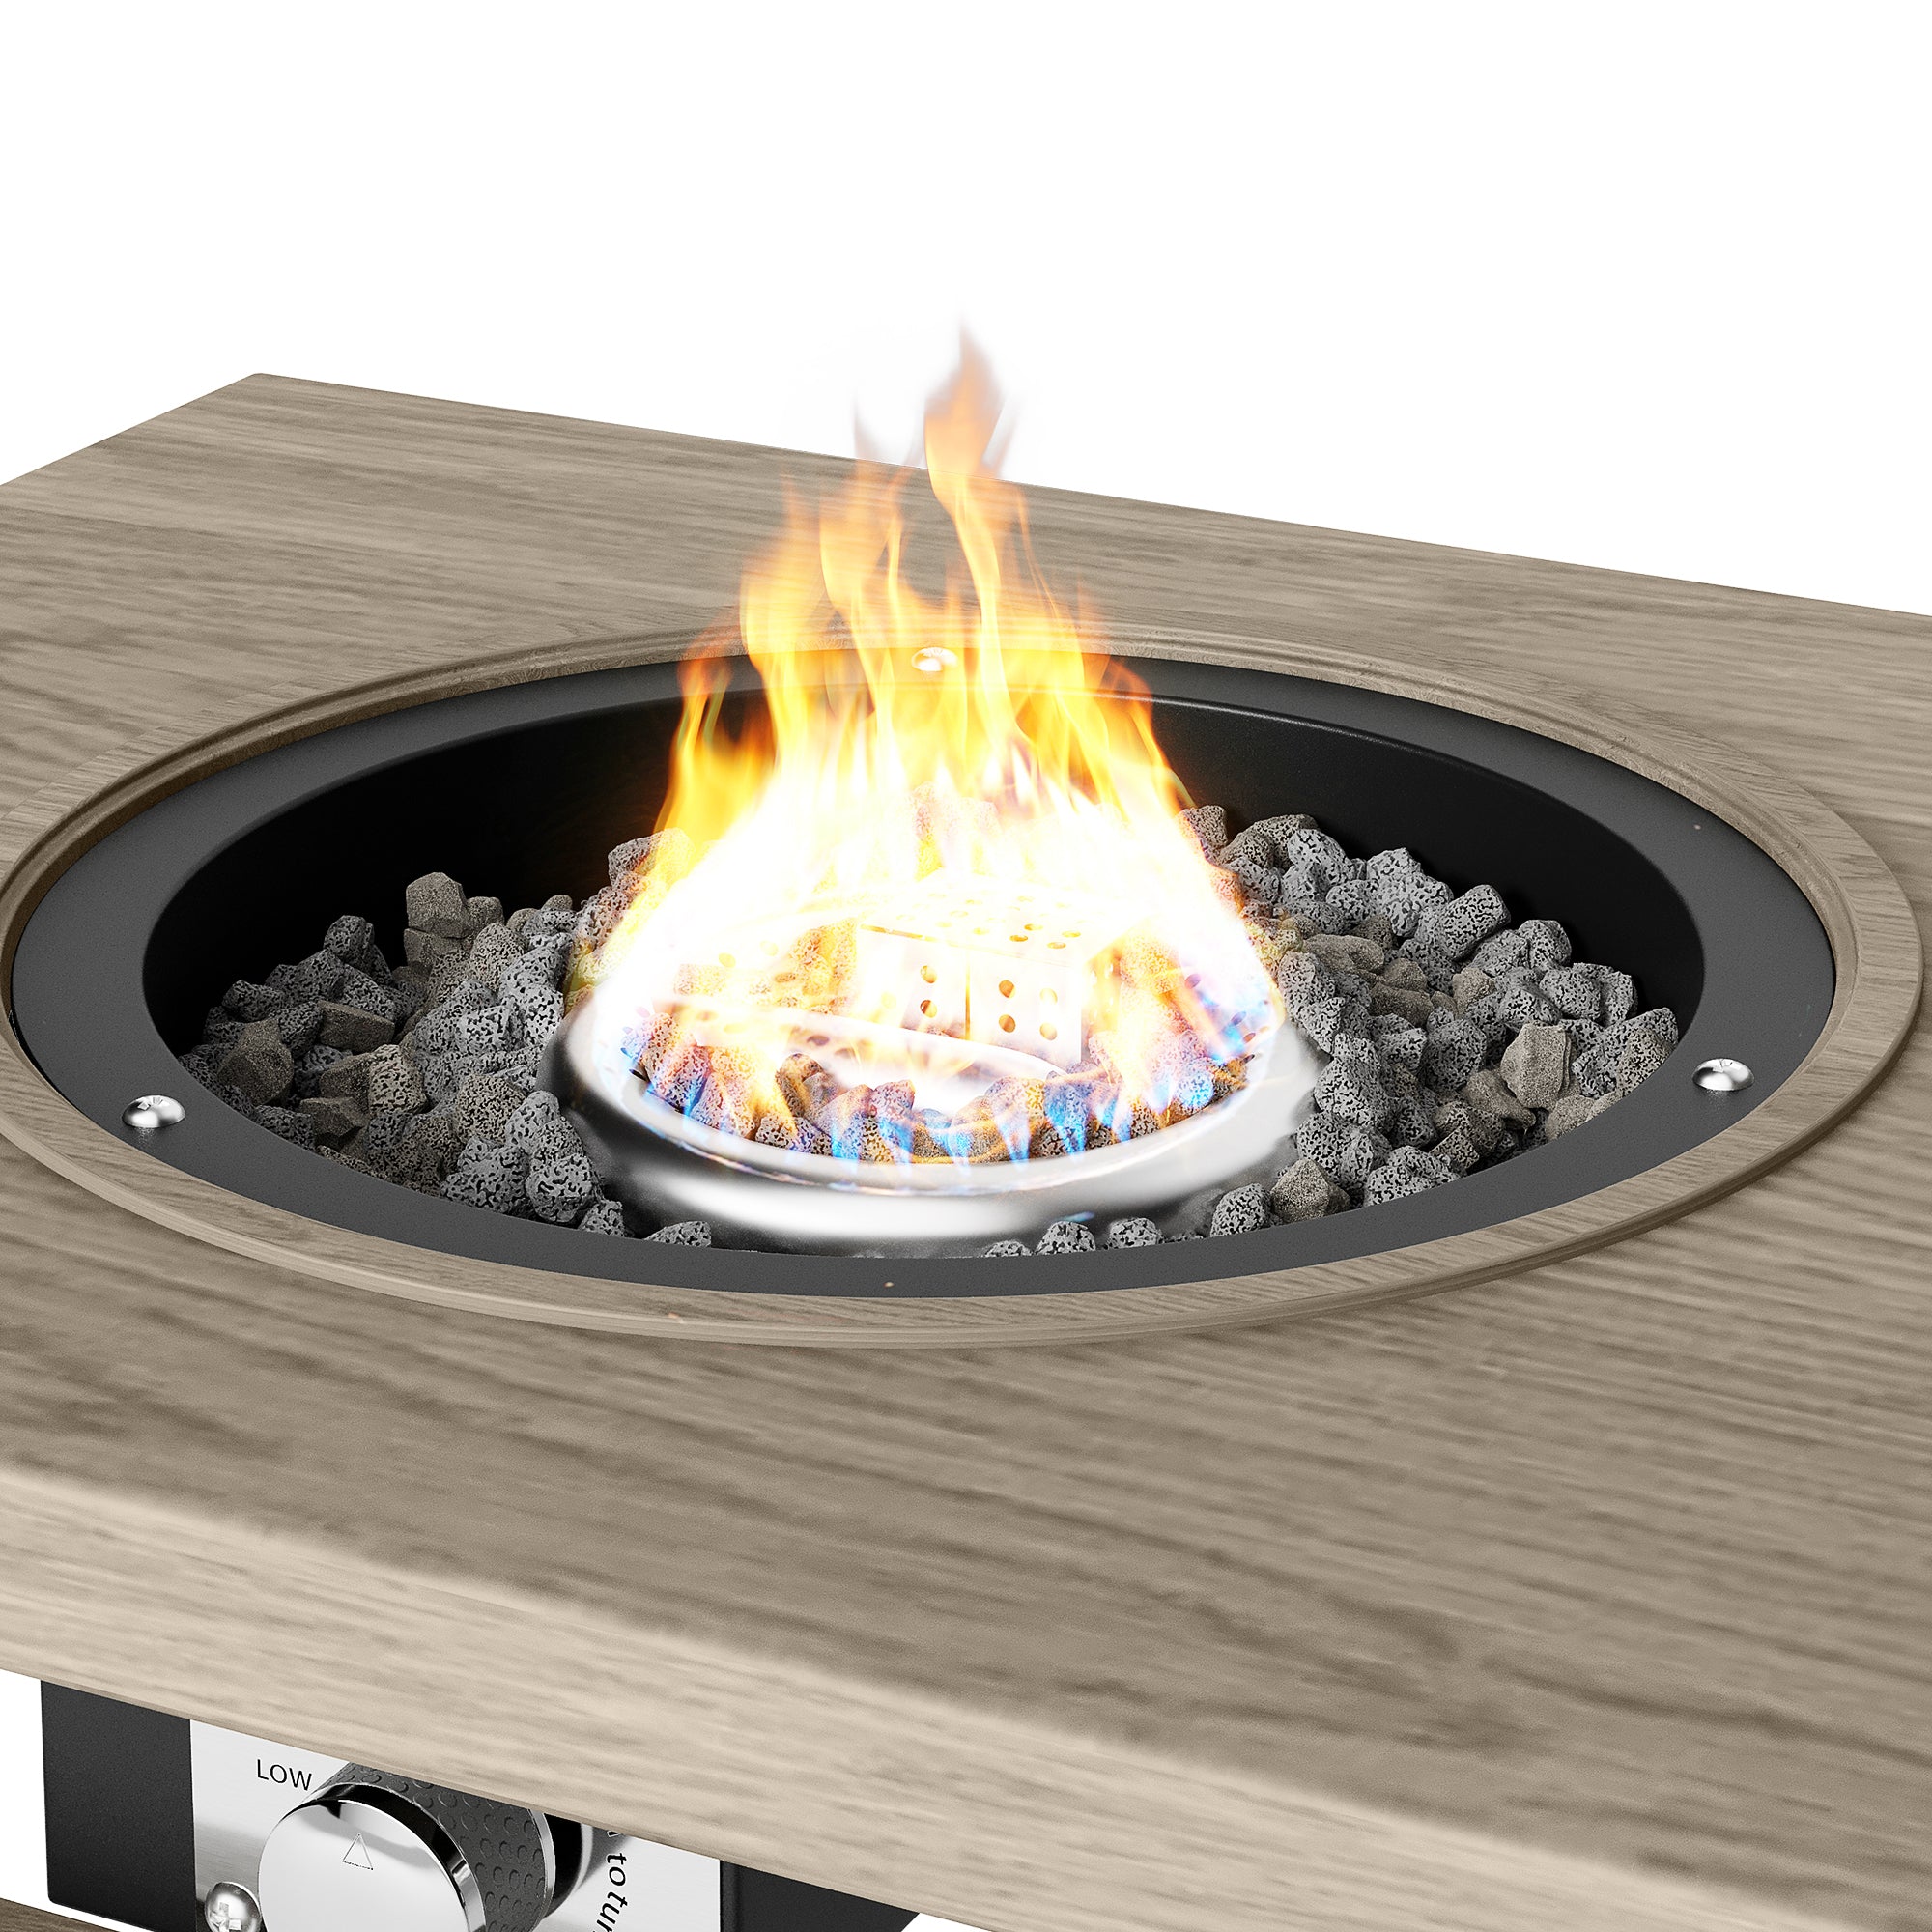 3 in 1 Coffee Table with Ice Bucket and Fire Pit Beige beige-aluminium